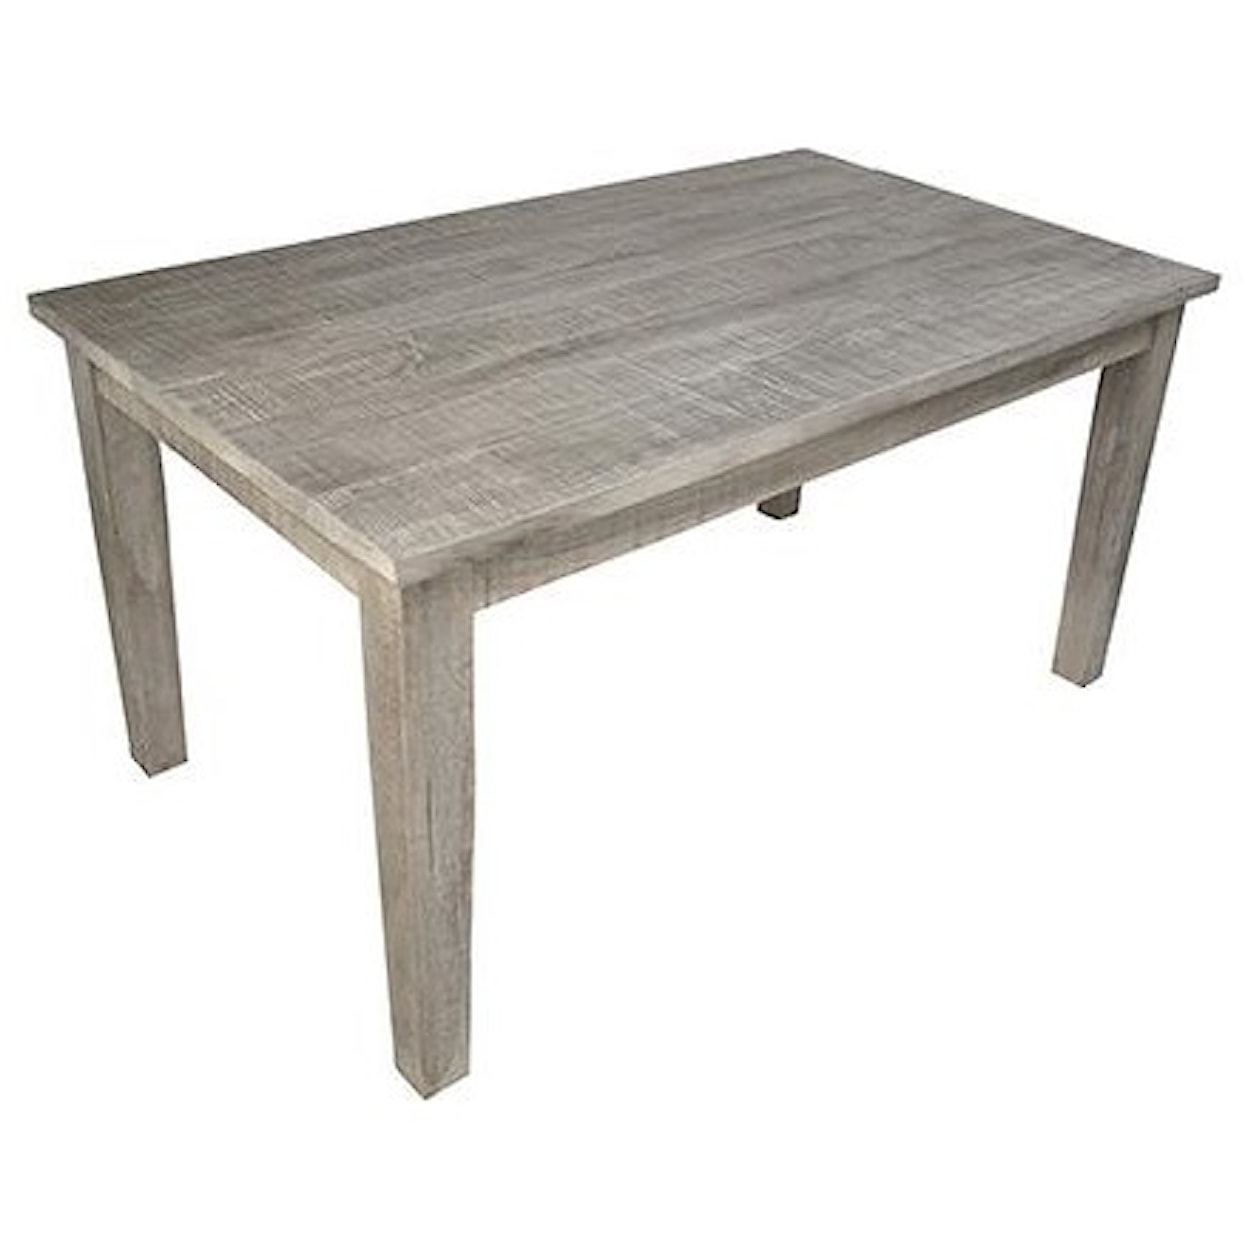 Dovetail Furniture Dining Tables Zion Dining Table